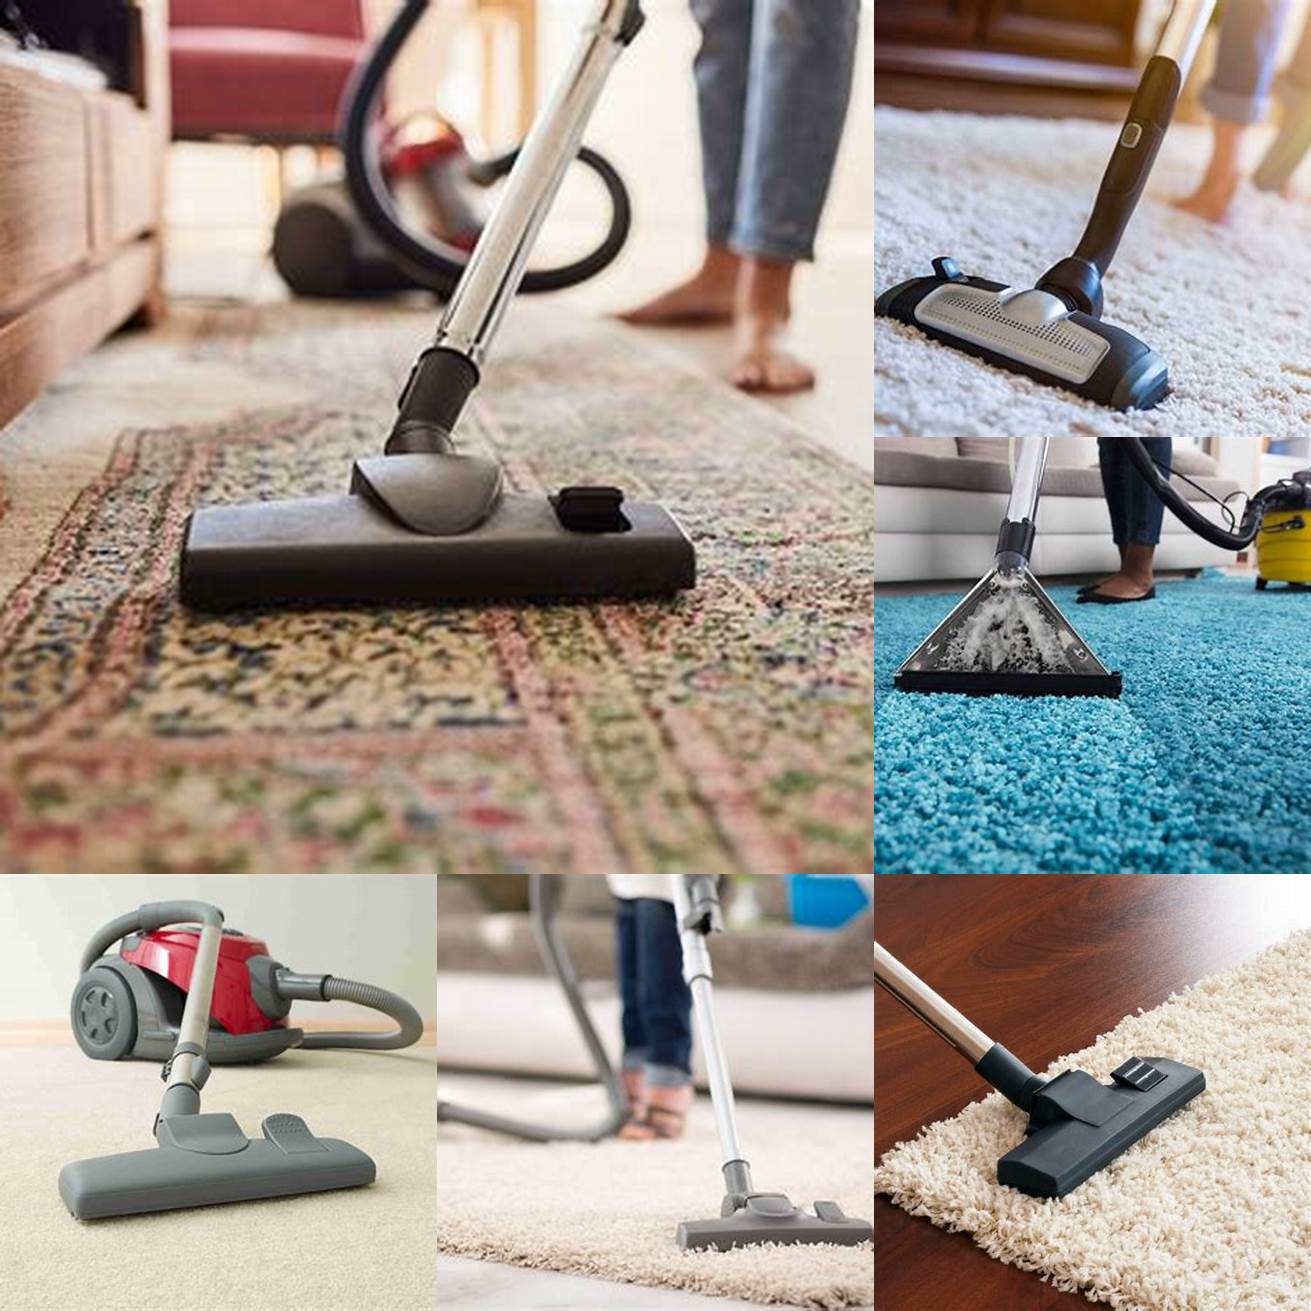 Vacuum your rug regularly to remove dust and dirt